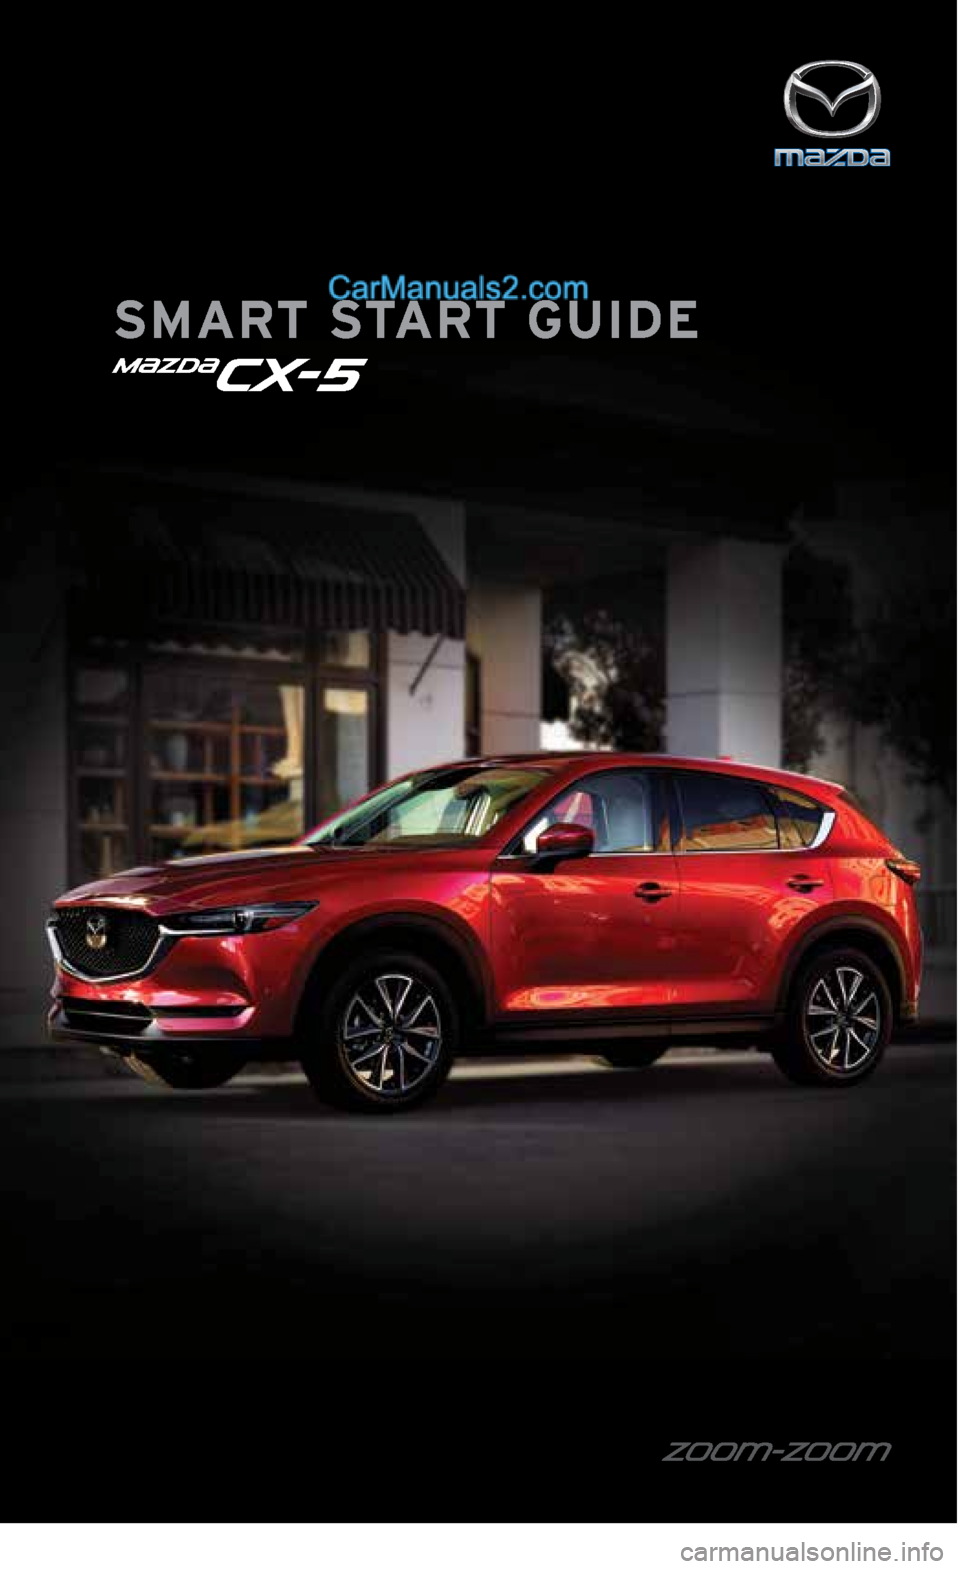 MAZDA MODEL CX-5 2017  Smart Start Guide (in English) First Edition  •  March 2017  •  Printed in U.S.A.  •  9999 95 050C 17SS 
© MAZDA NORTH AMERICAN OPERATIONS
SMART START GUIDE 
M{ZD{CX-5
2364256 17a CX-5 SSG 030117.indd   23/1/17   5:47 PM    